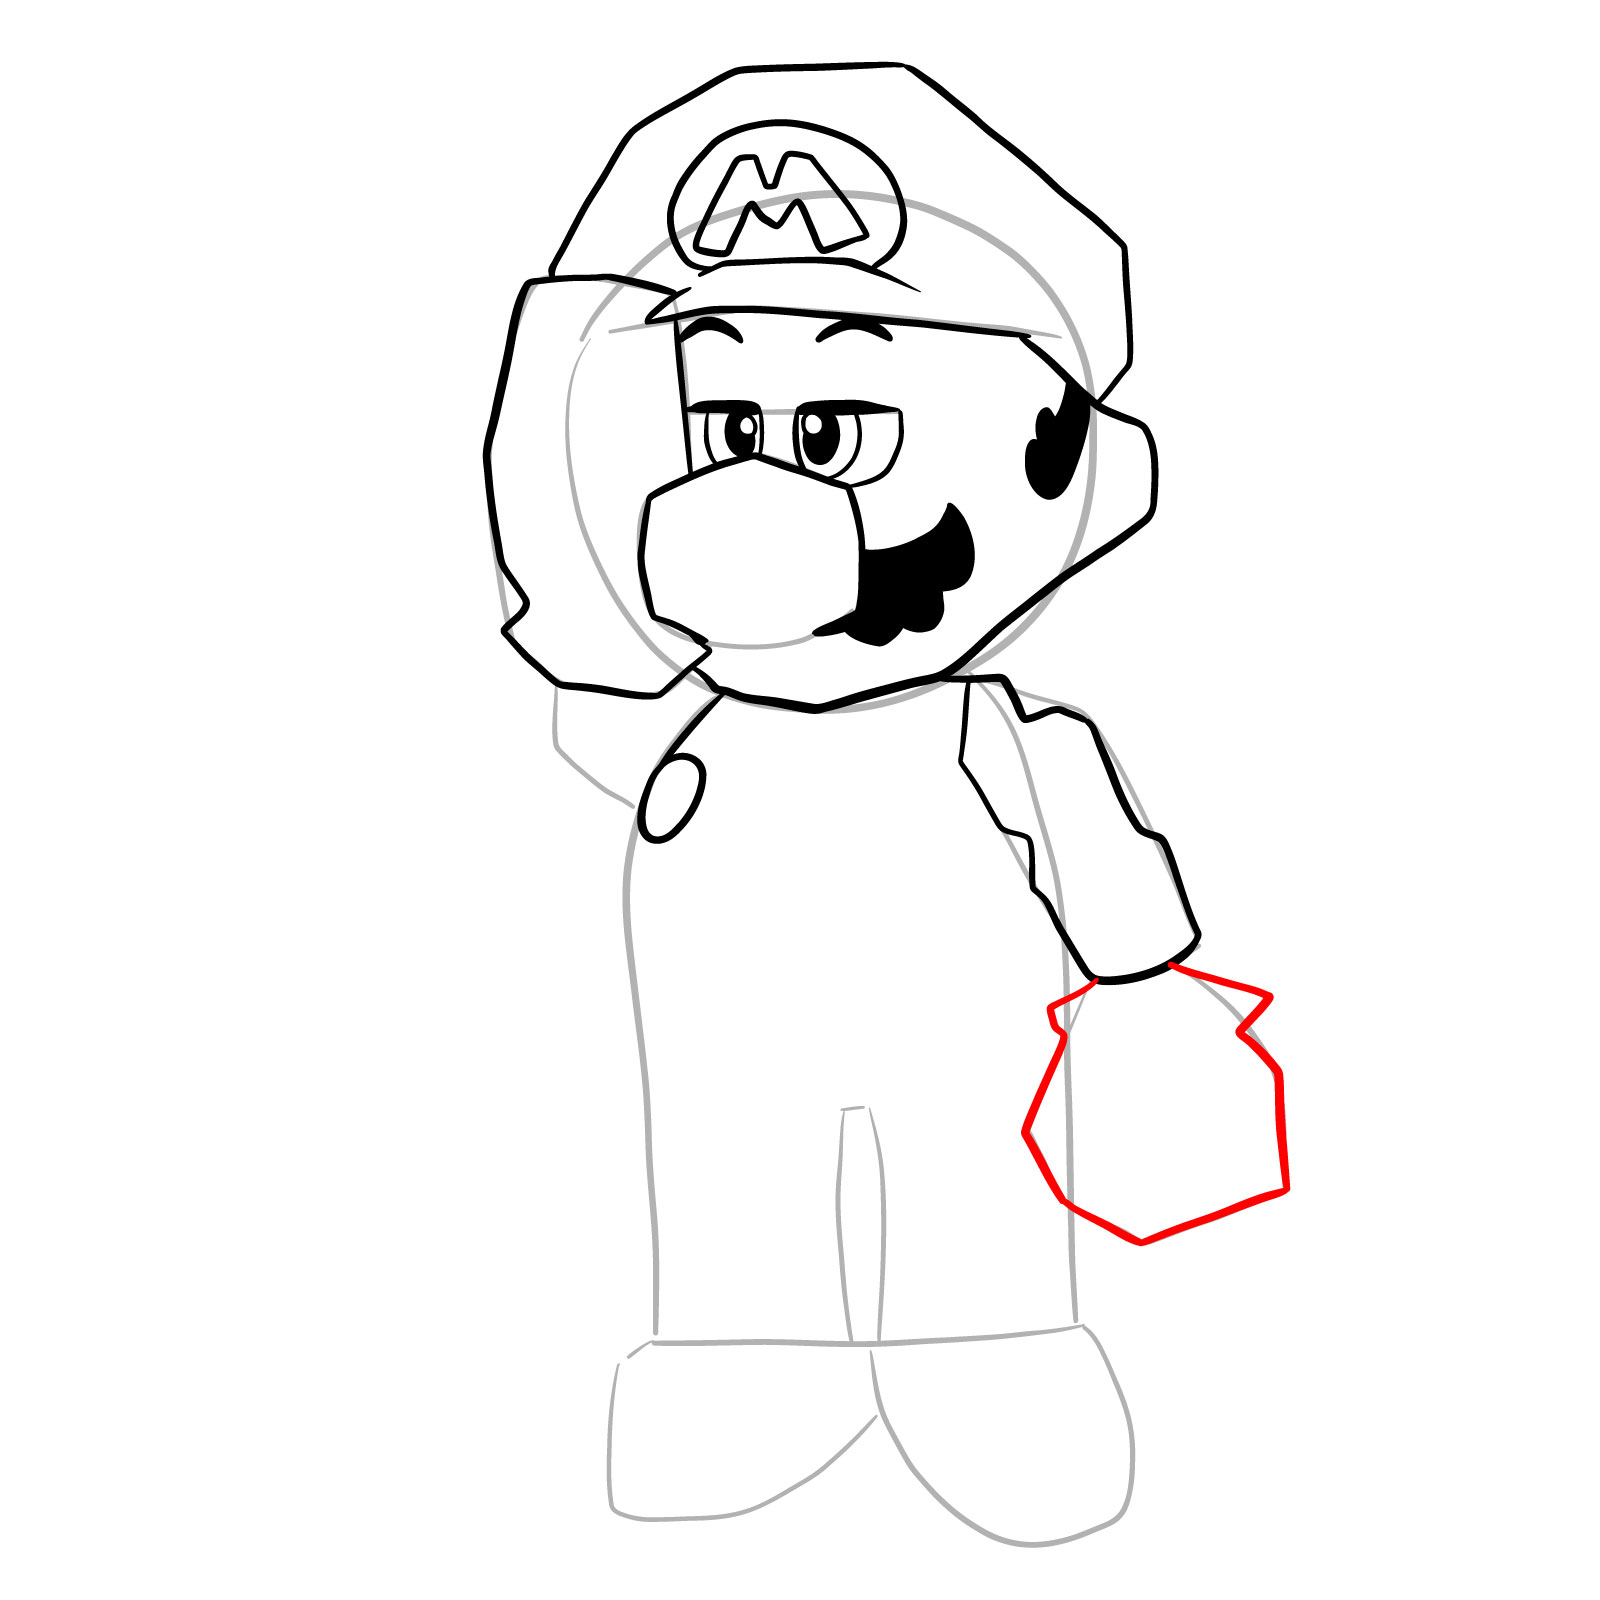 How to draw SuperMarioGlitchy4 (N64) - step 18